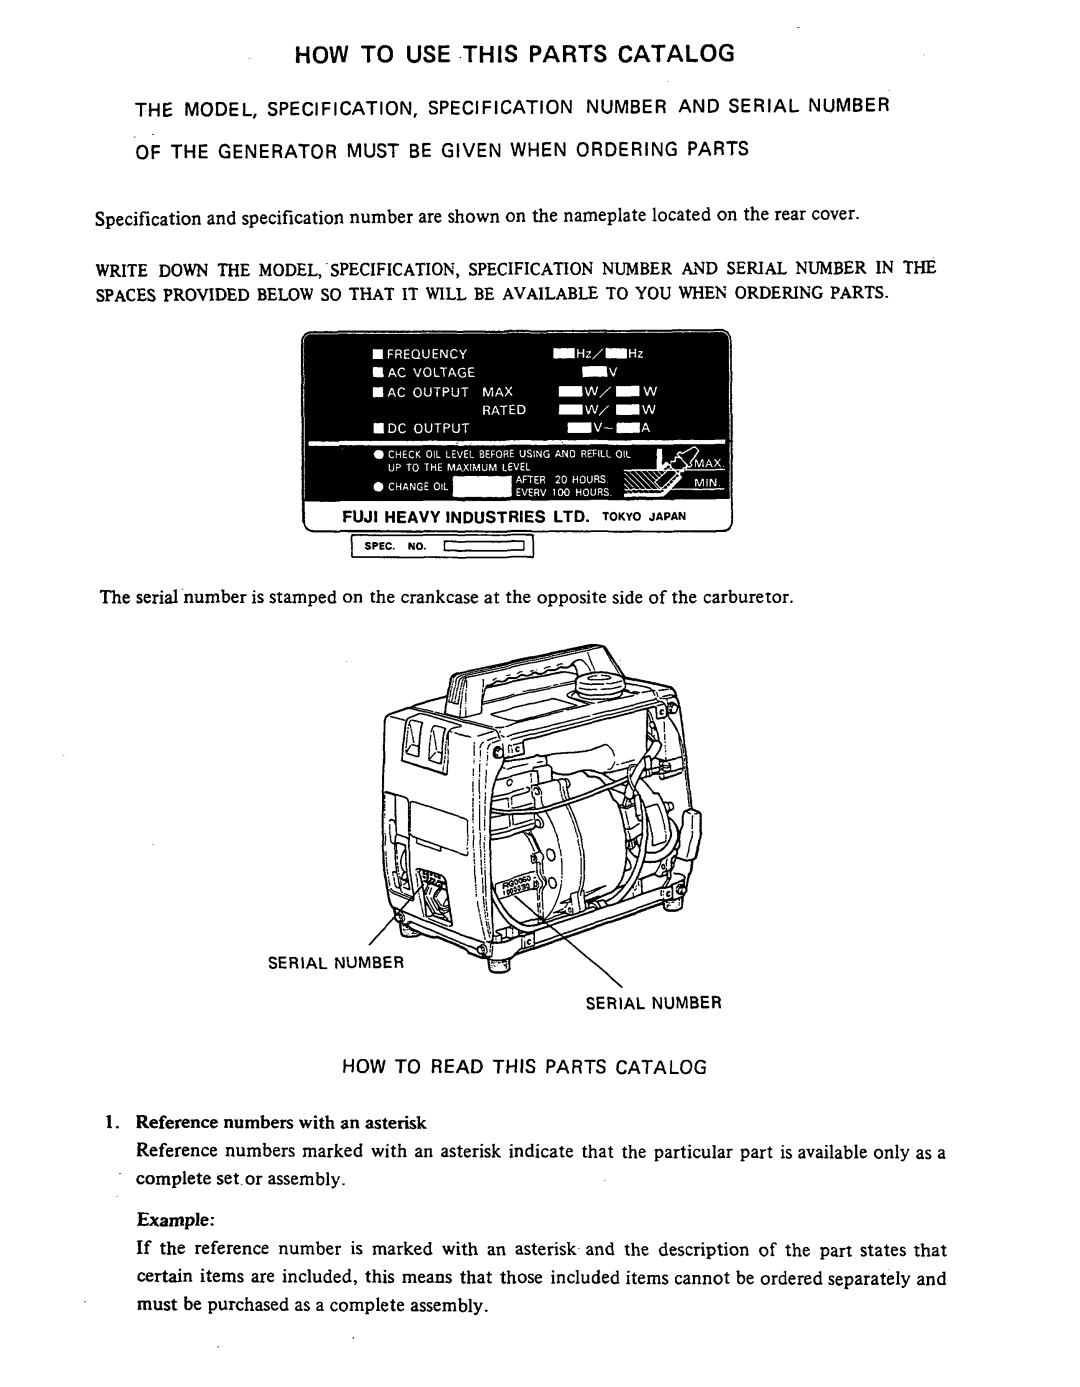 Subaru Robin Power Products R650 manual How To Use .This Partscatalog, Of Thegeneratormust Be Given When Orderingparts 